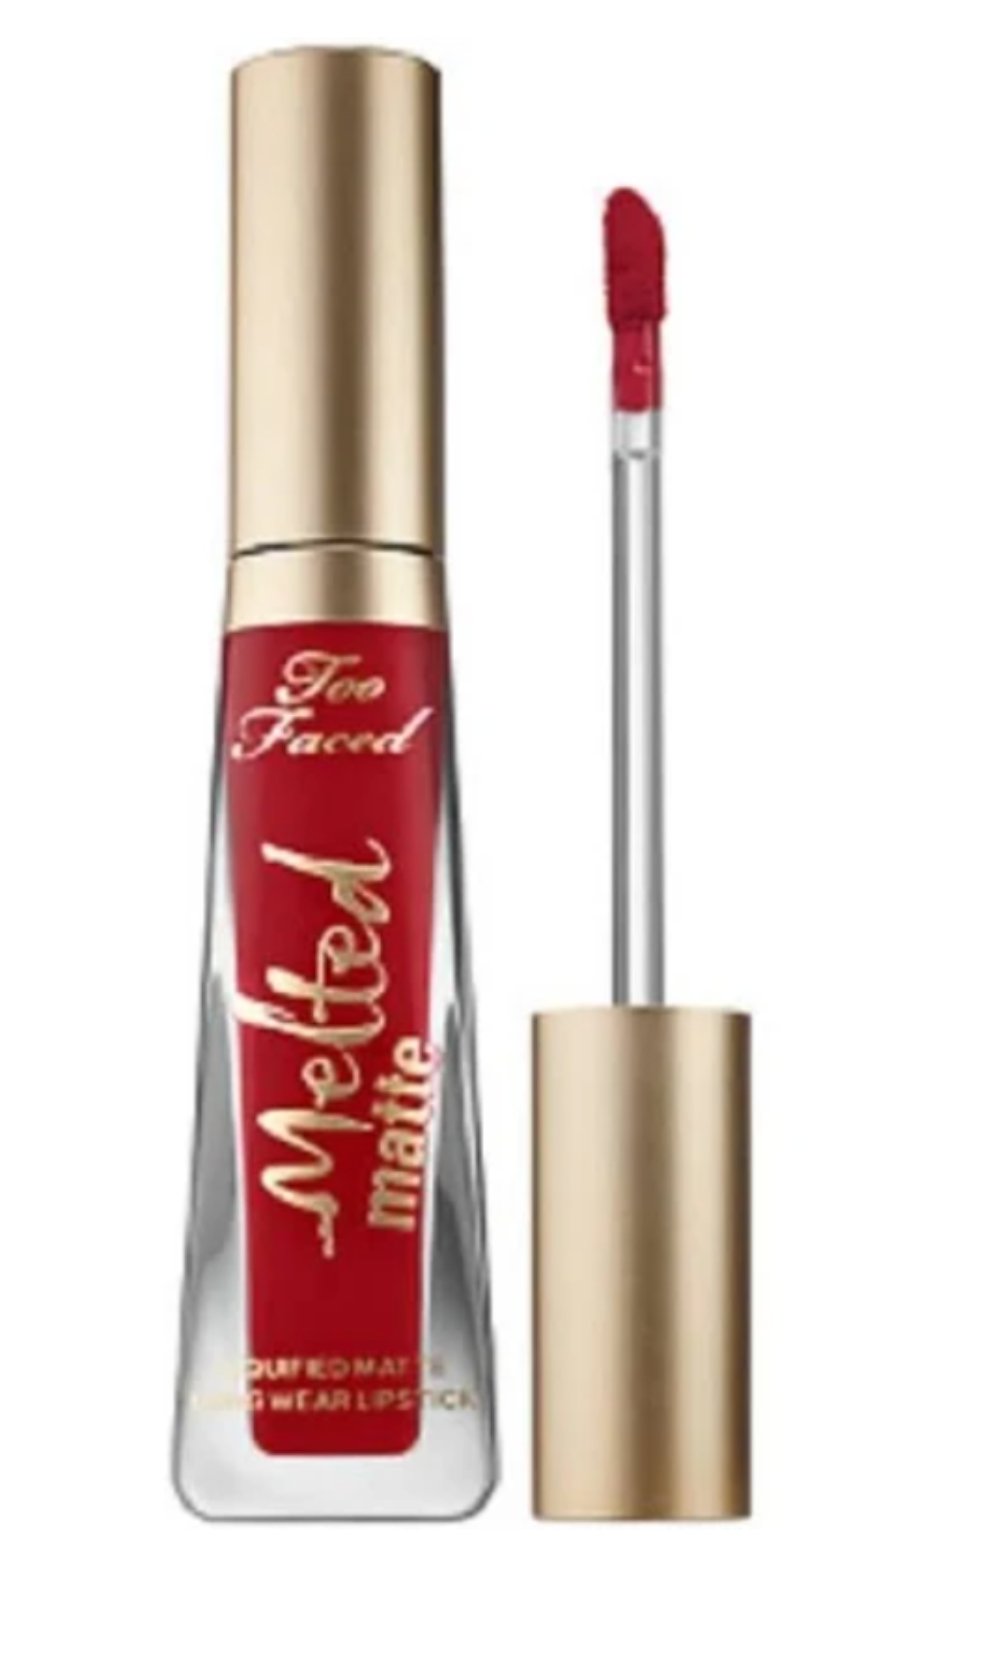 Too Faced Melted Matte Lip Stain 7ml - The Face Method